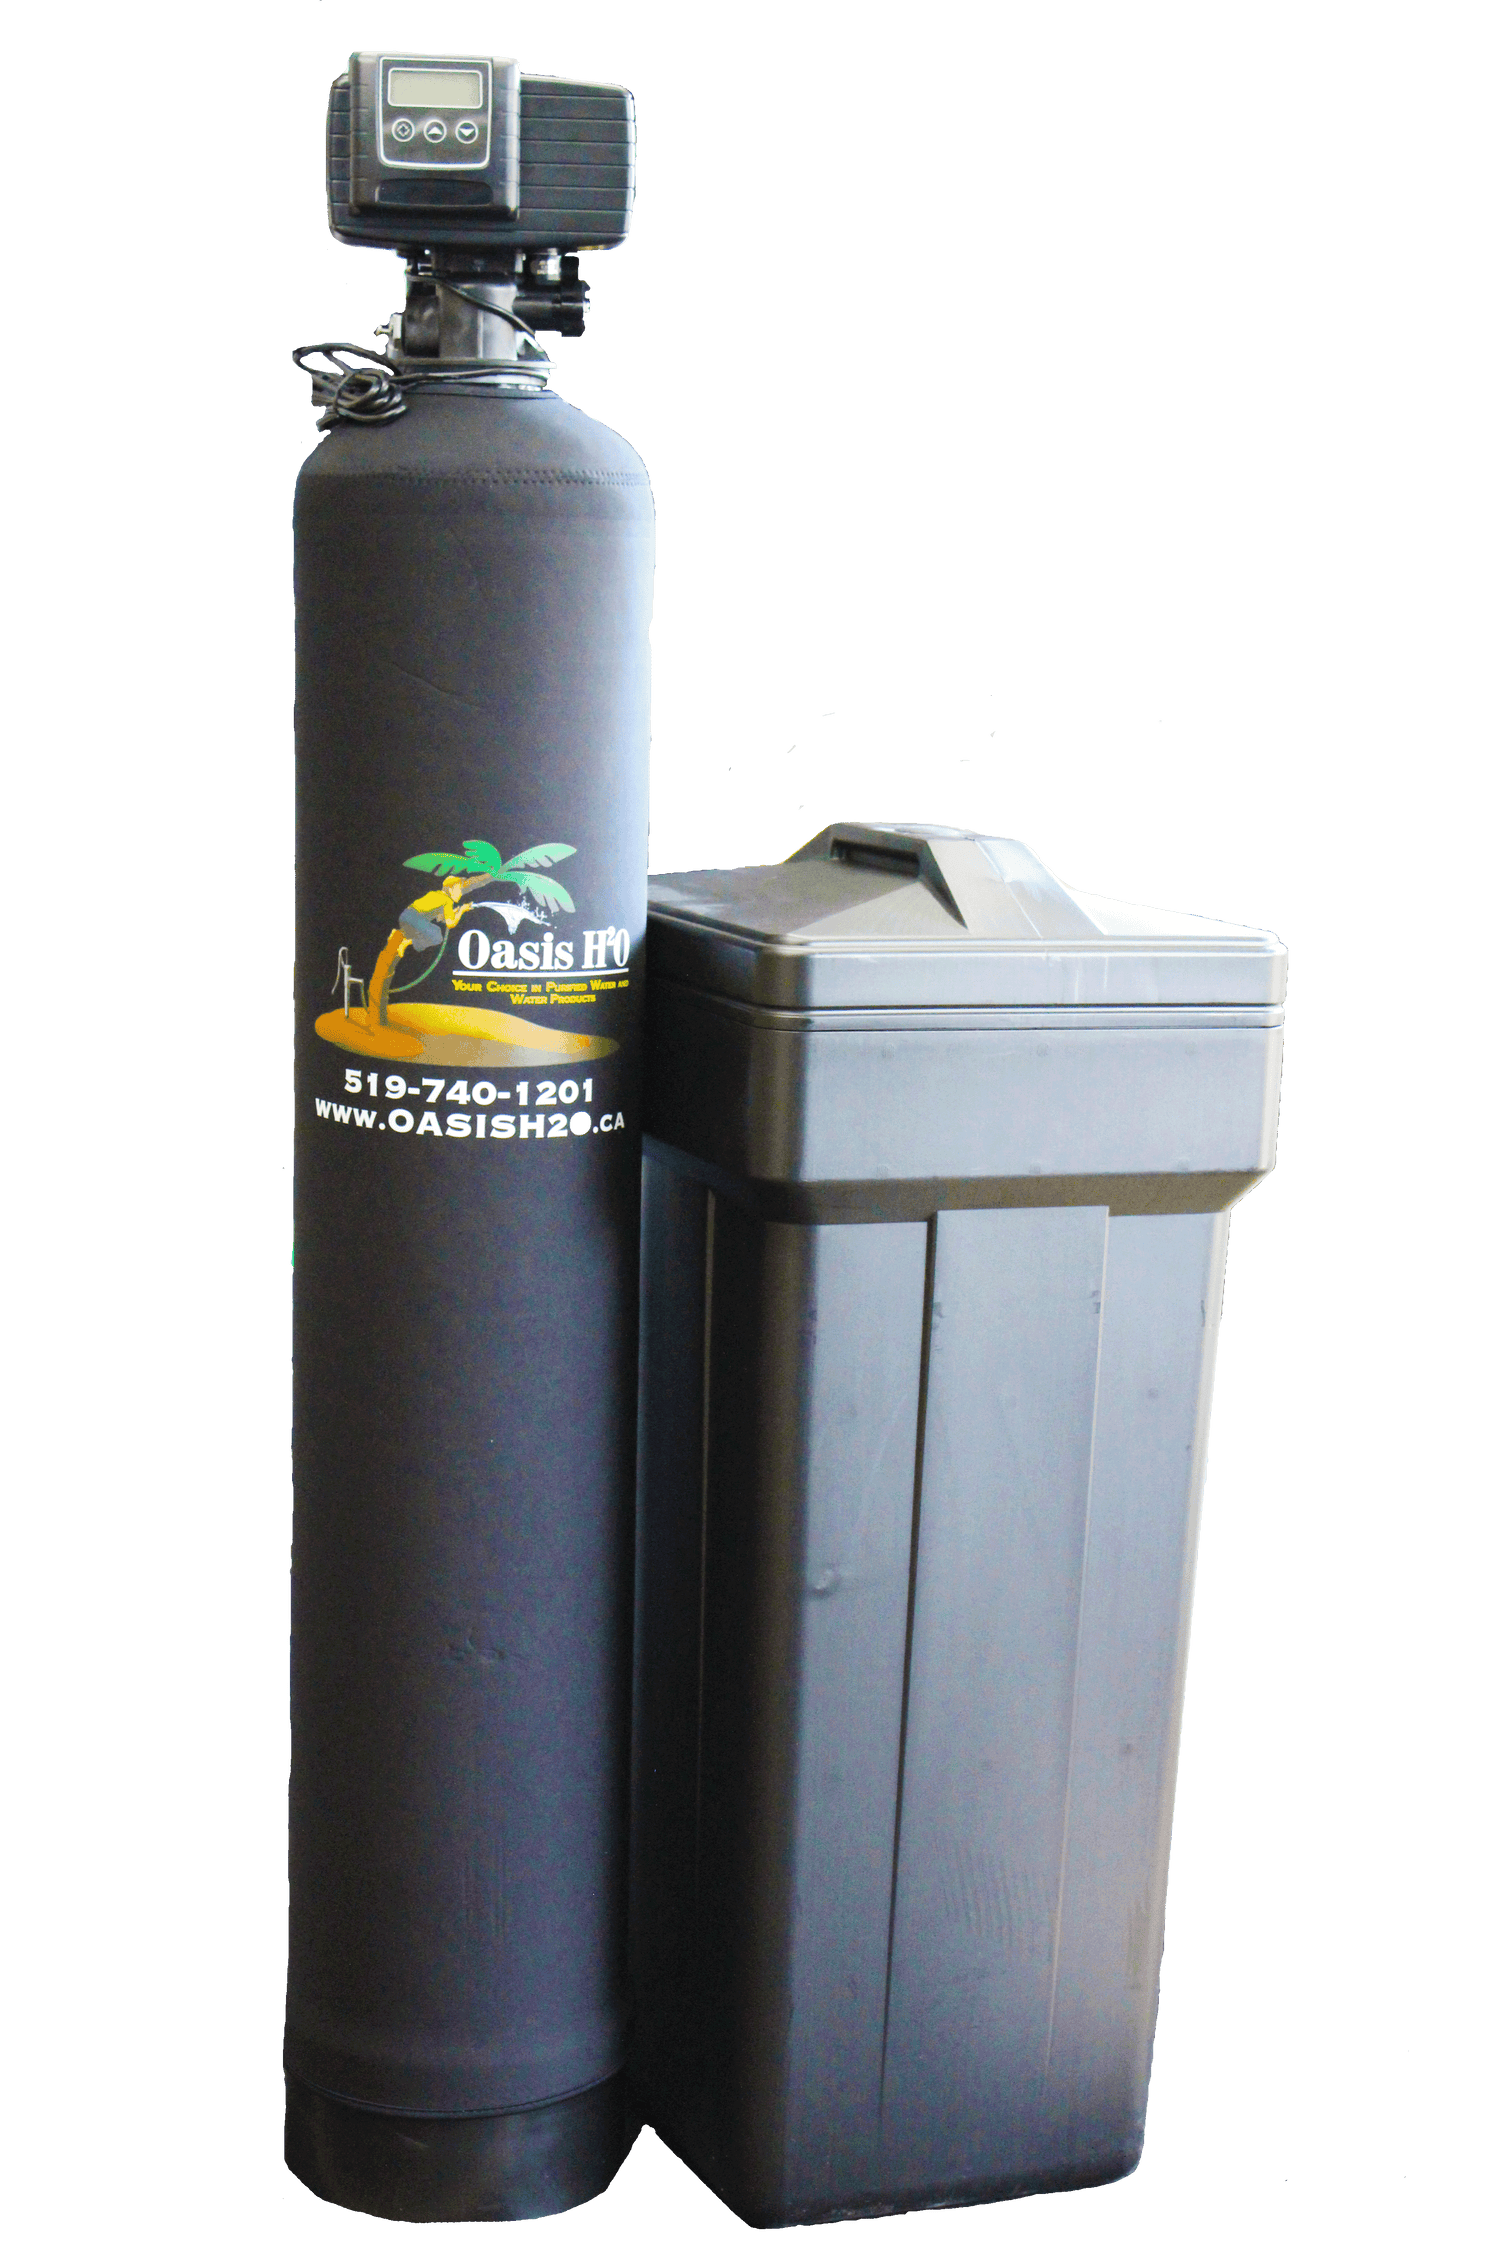 Water Softener, Tankless Heater &amp; RO Combo Package Deal